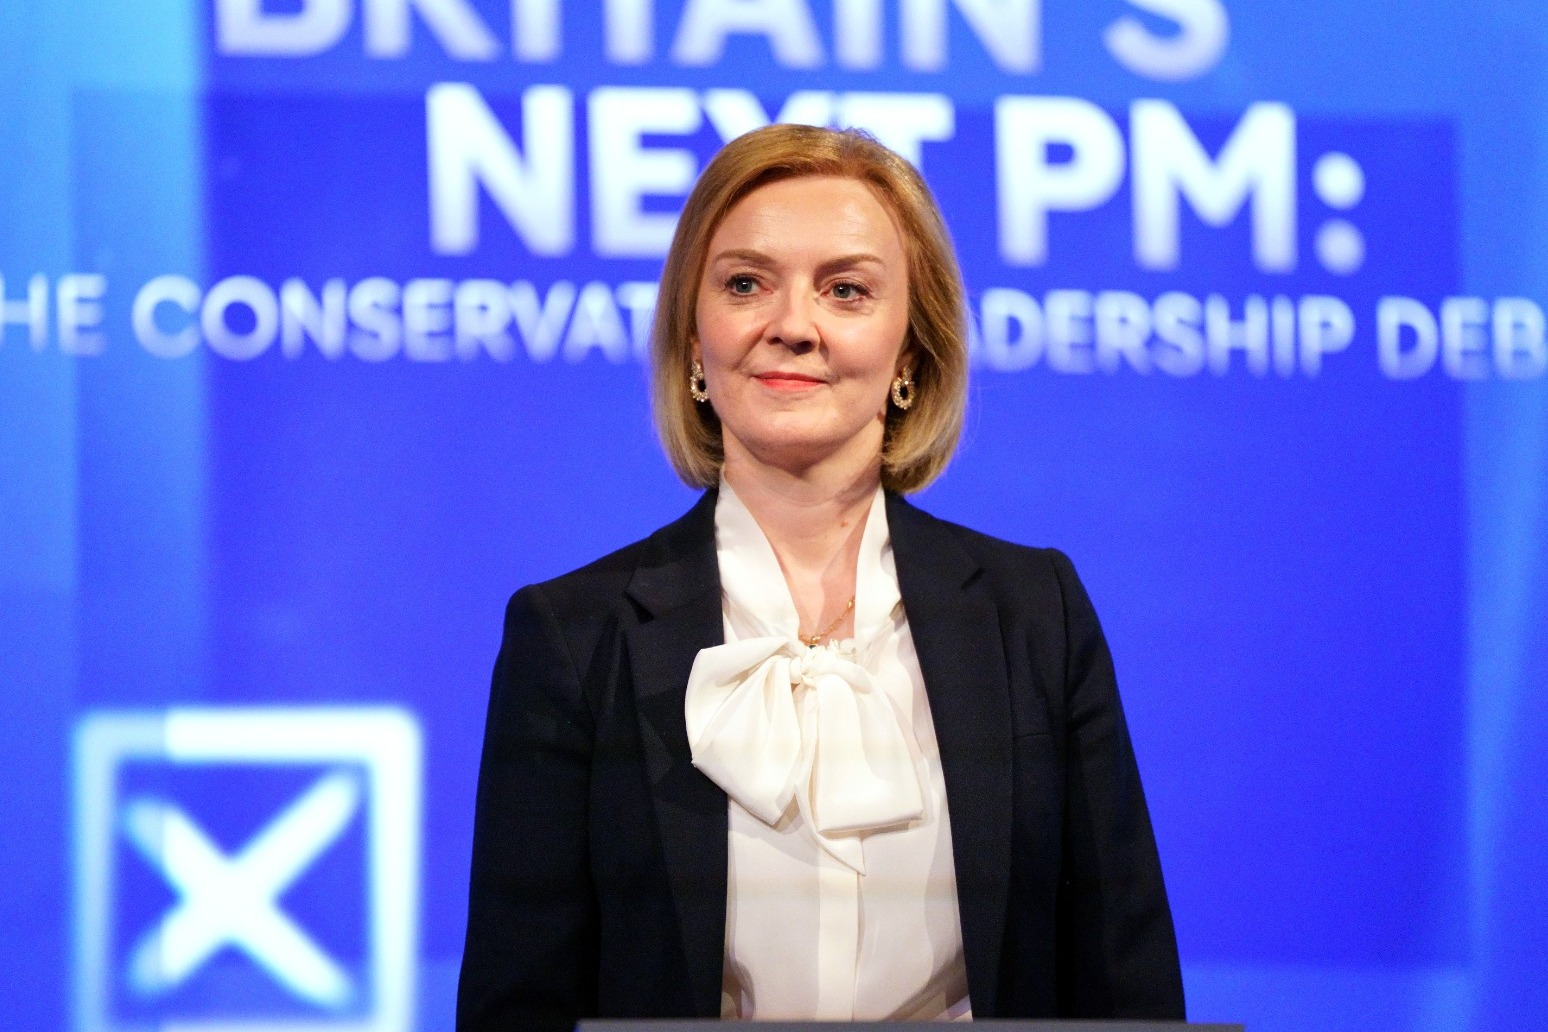 Liz Truss: I am only the person who can deliver change in line with Tory values 